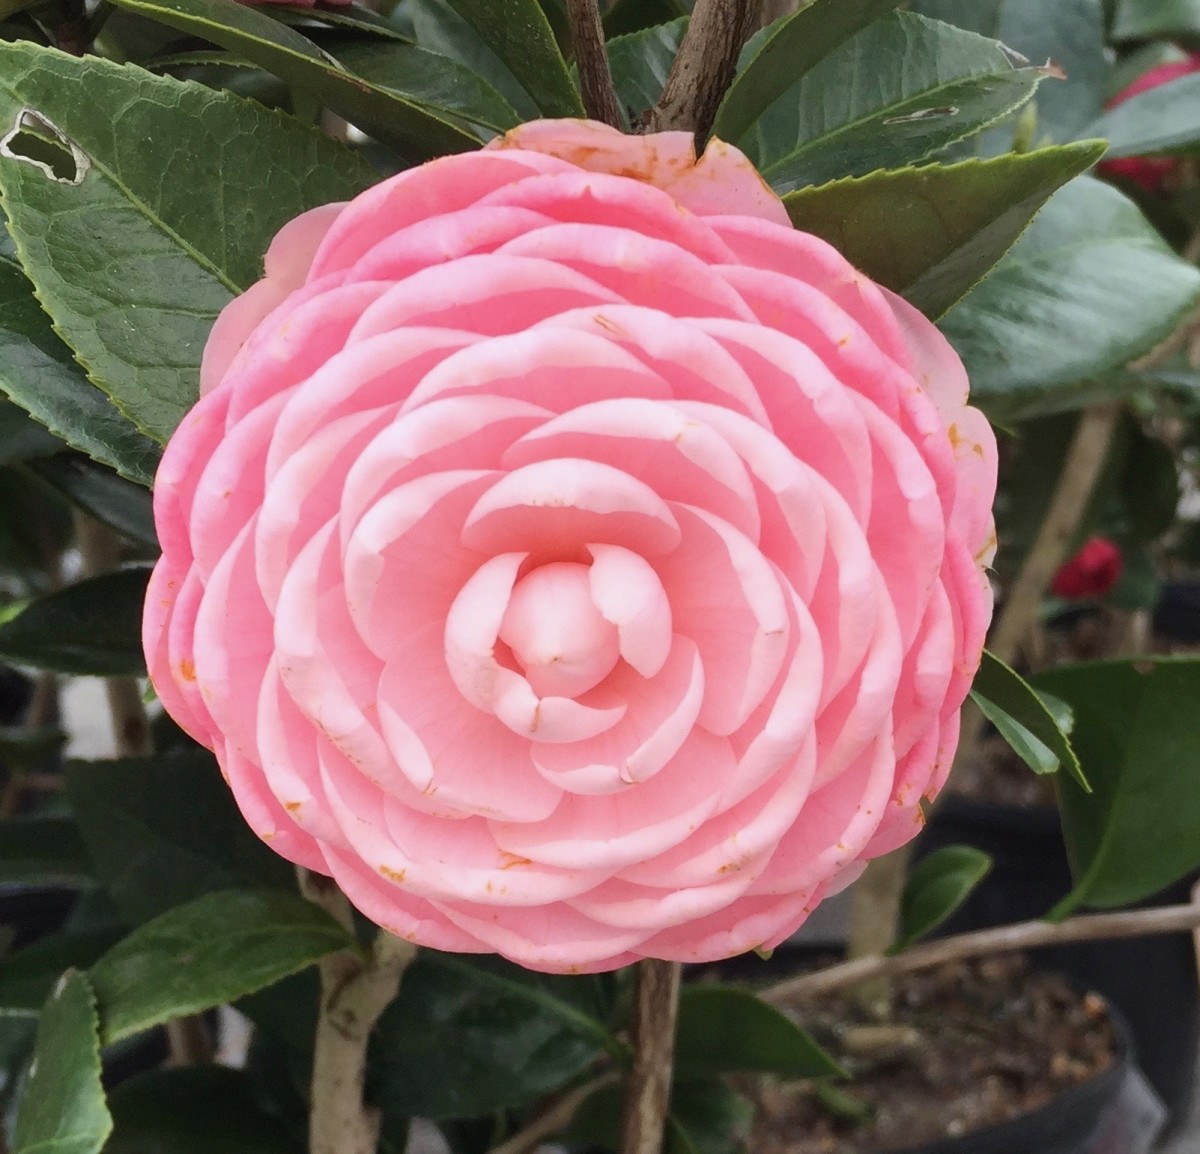 This japonica is called “Pink Perfection”.  Its petals are so perfectly arranged, it almost appears to be an artificial flower, but it is very real, and absolutely gorgeous.